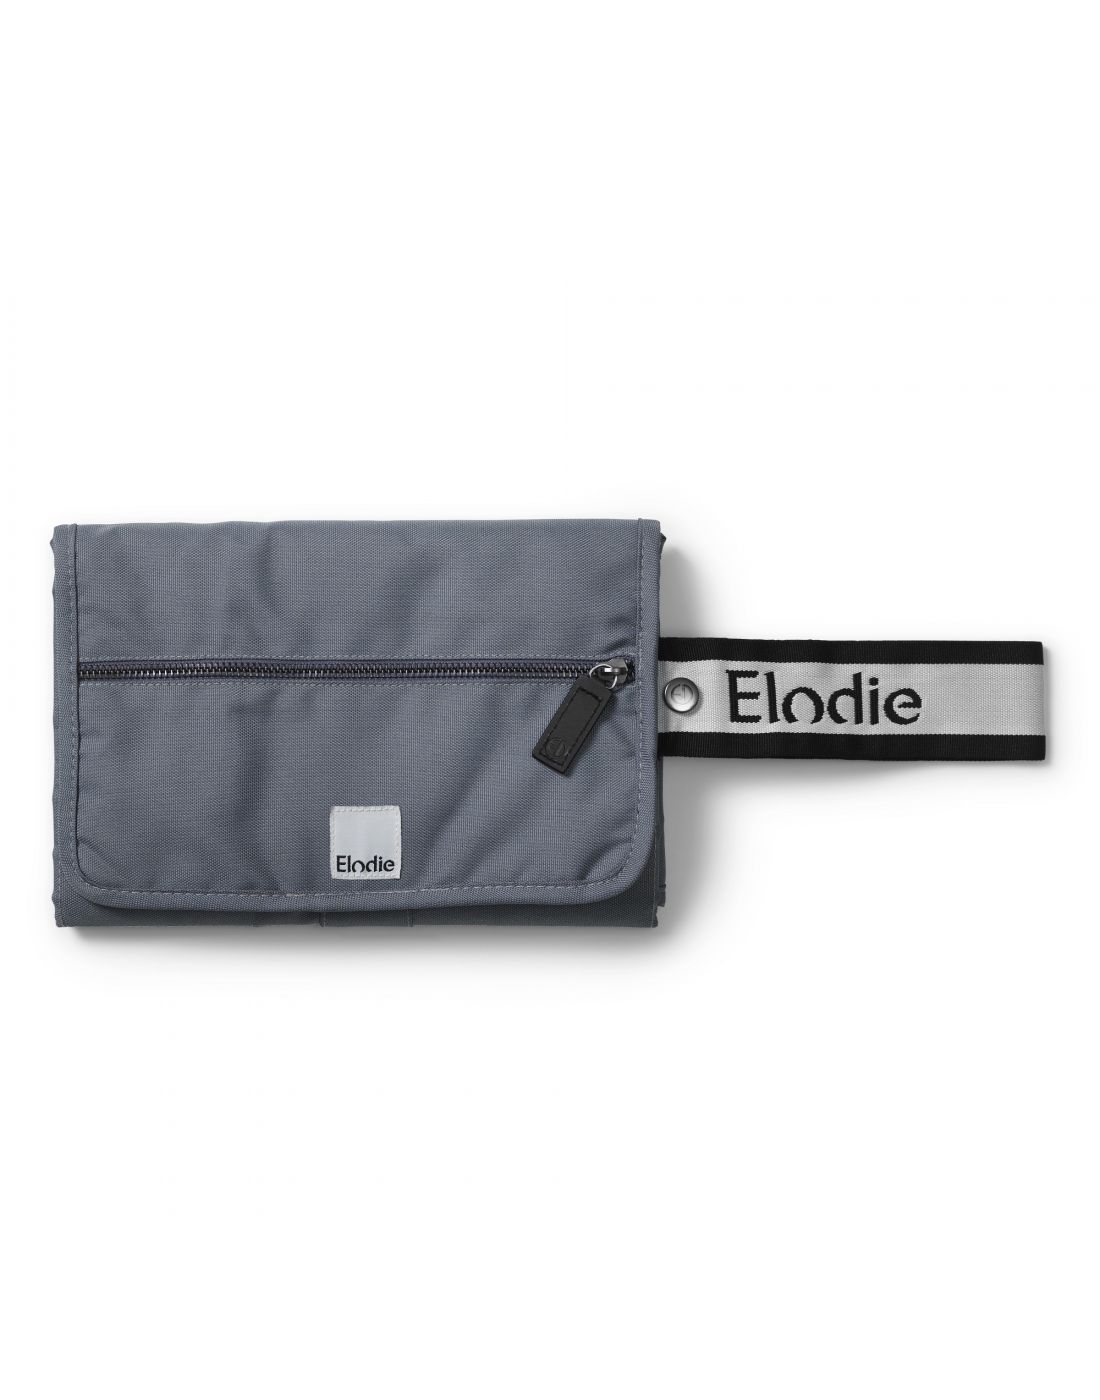 Elodie Details Baby Portable Changing Pad Tender Blue